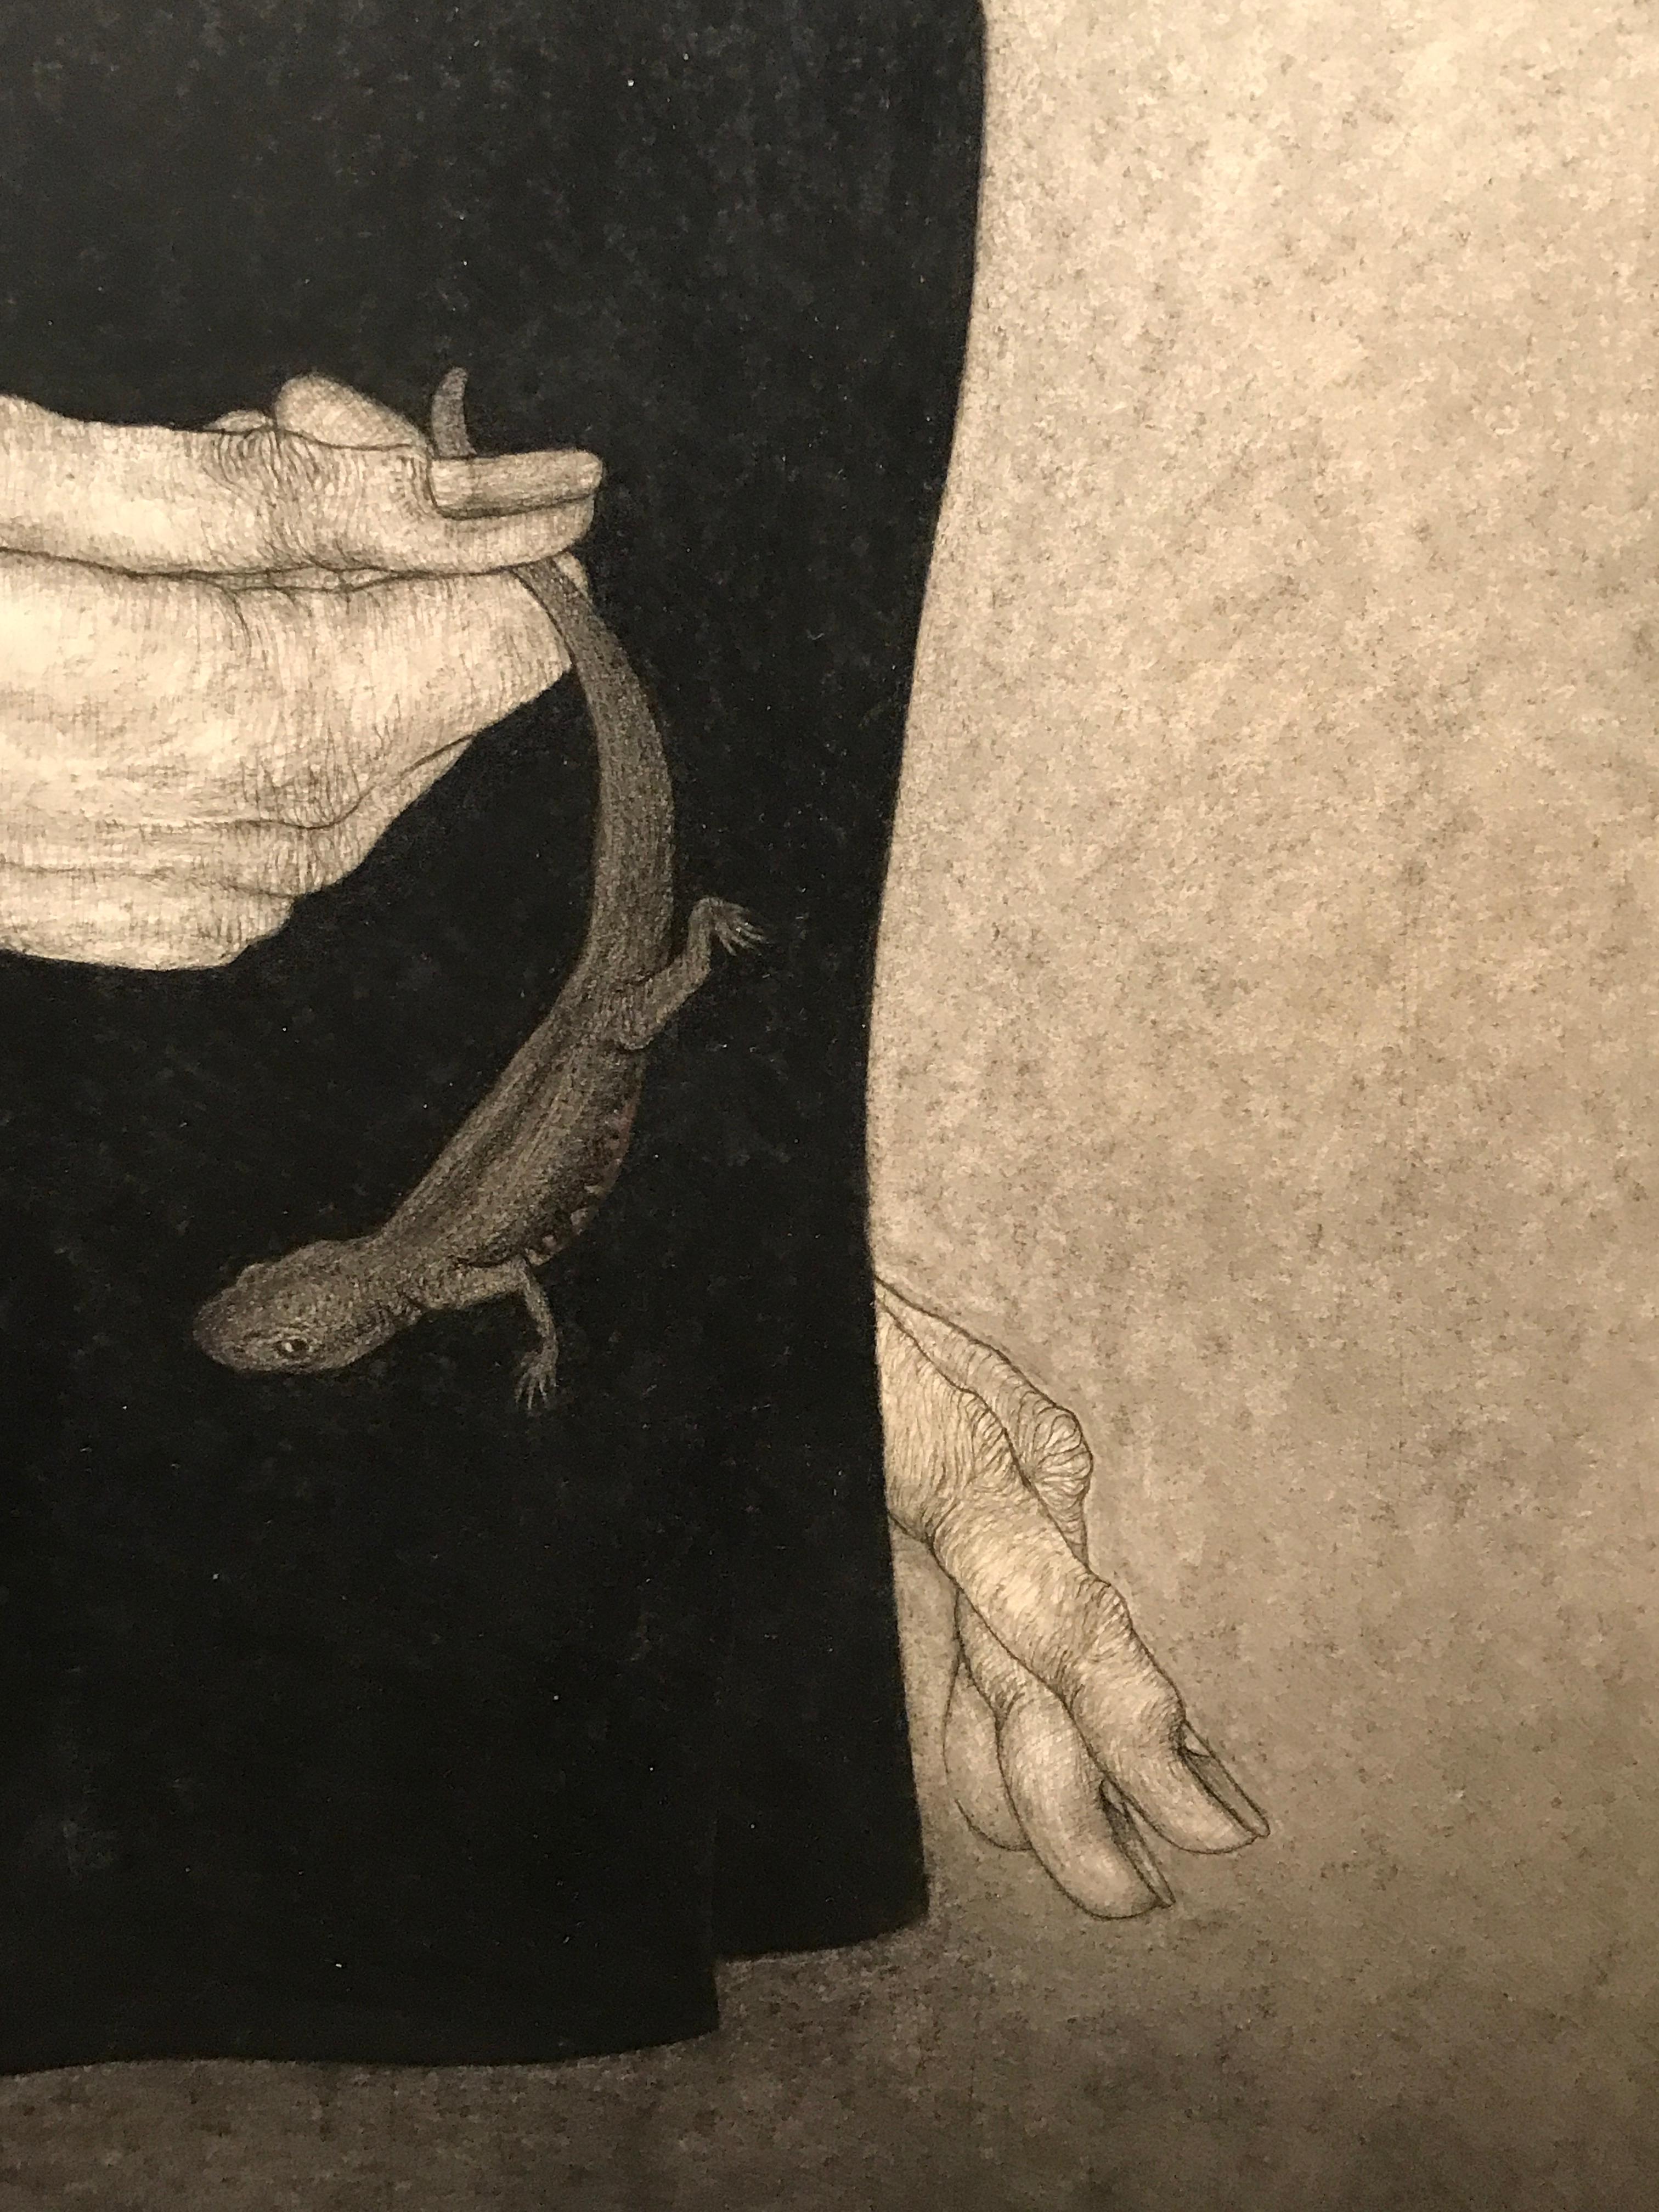 Takashi Saito Japanese born 1943. Japanese woman holding lizard.  Pencil and ink on rice paper mounted on cradled wood panel.  Signed in Japanese.
Takashi Saito
was born in Tokyo in 1943. Began self-taught painting and became a painter, fascinated